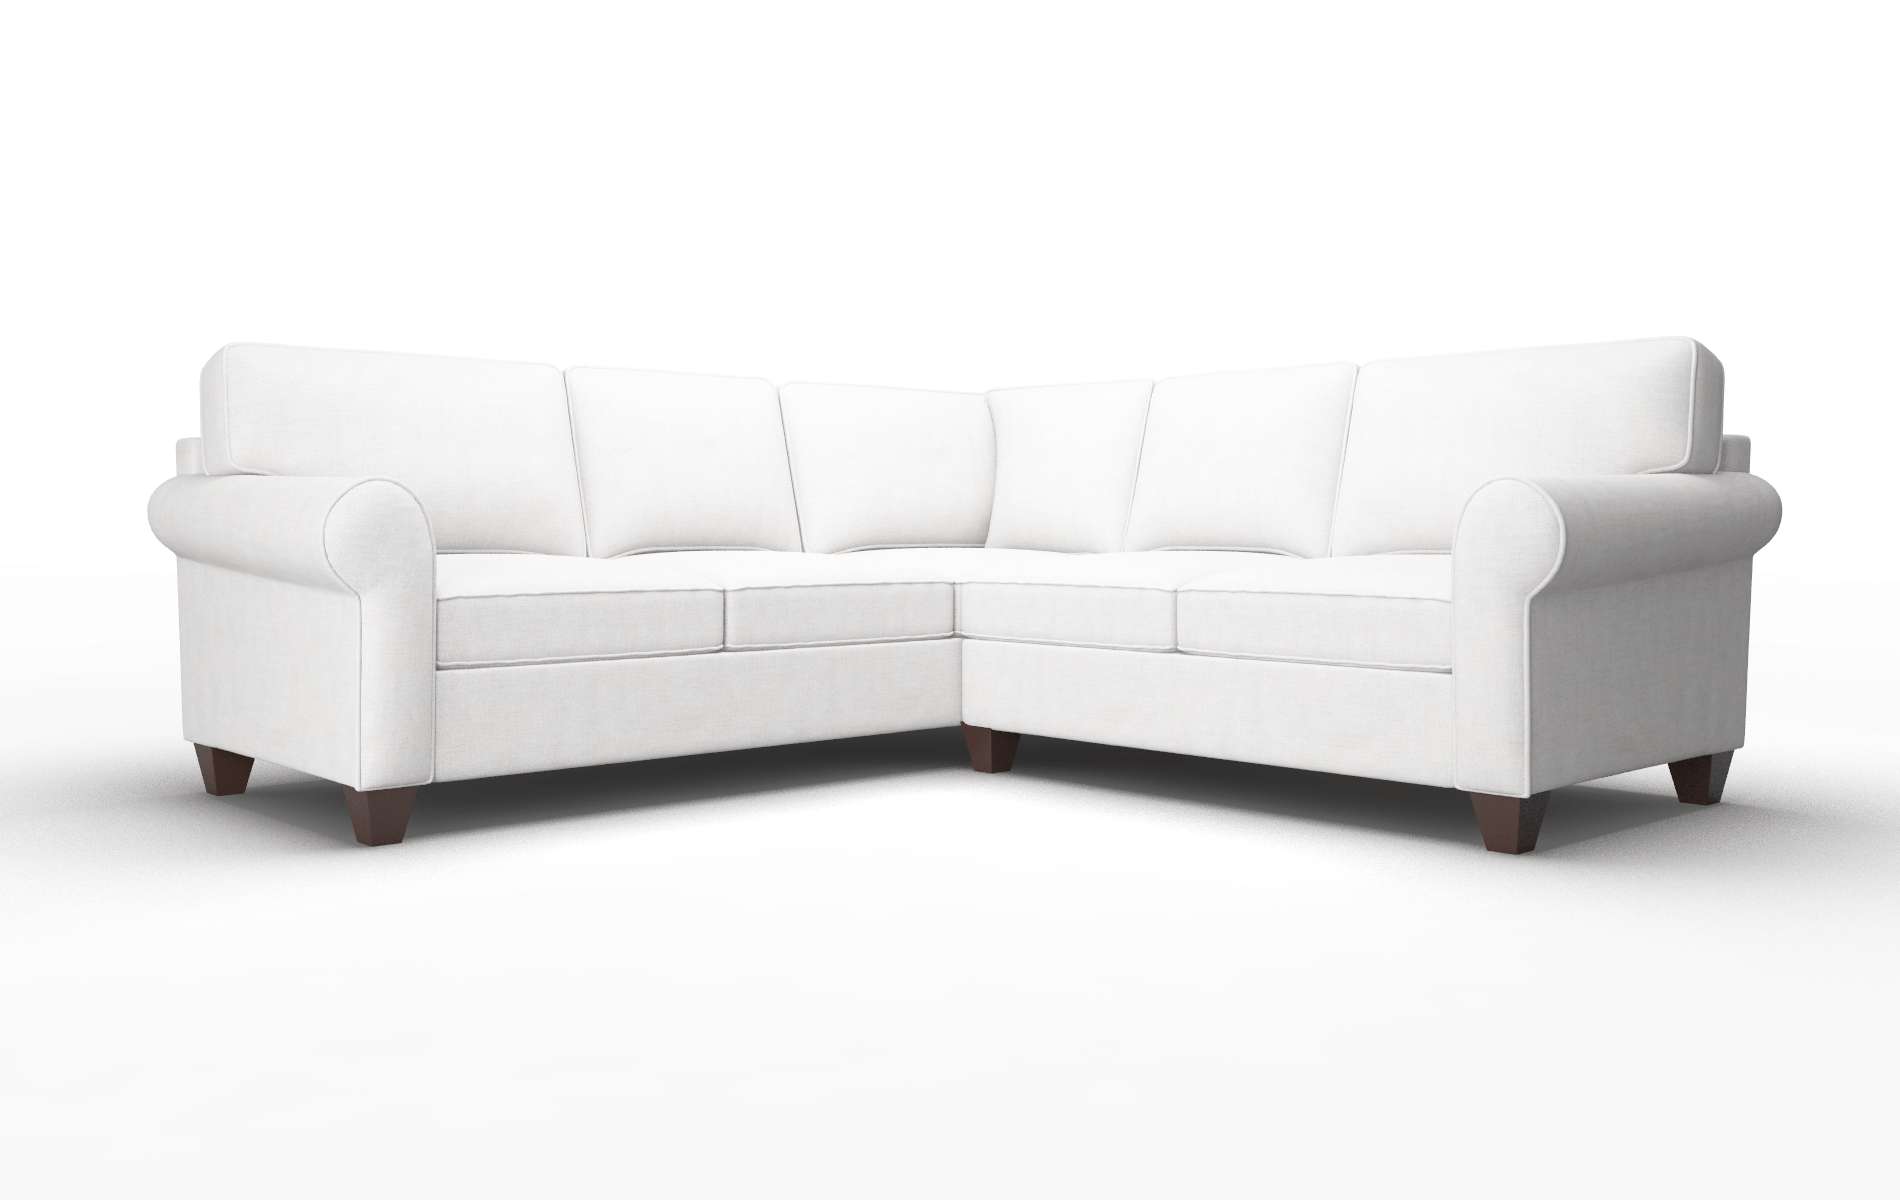 Augusta Catalina Ivory Sectional espresso legs